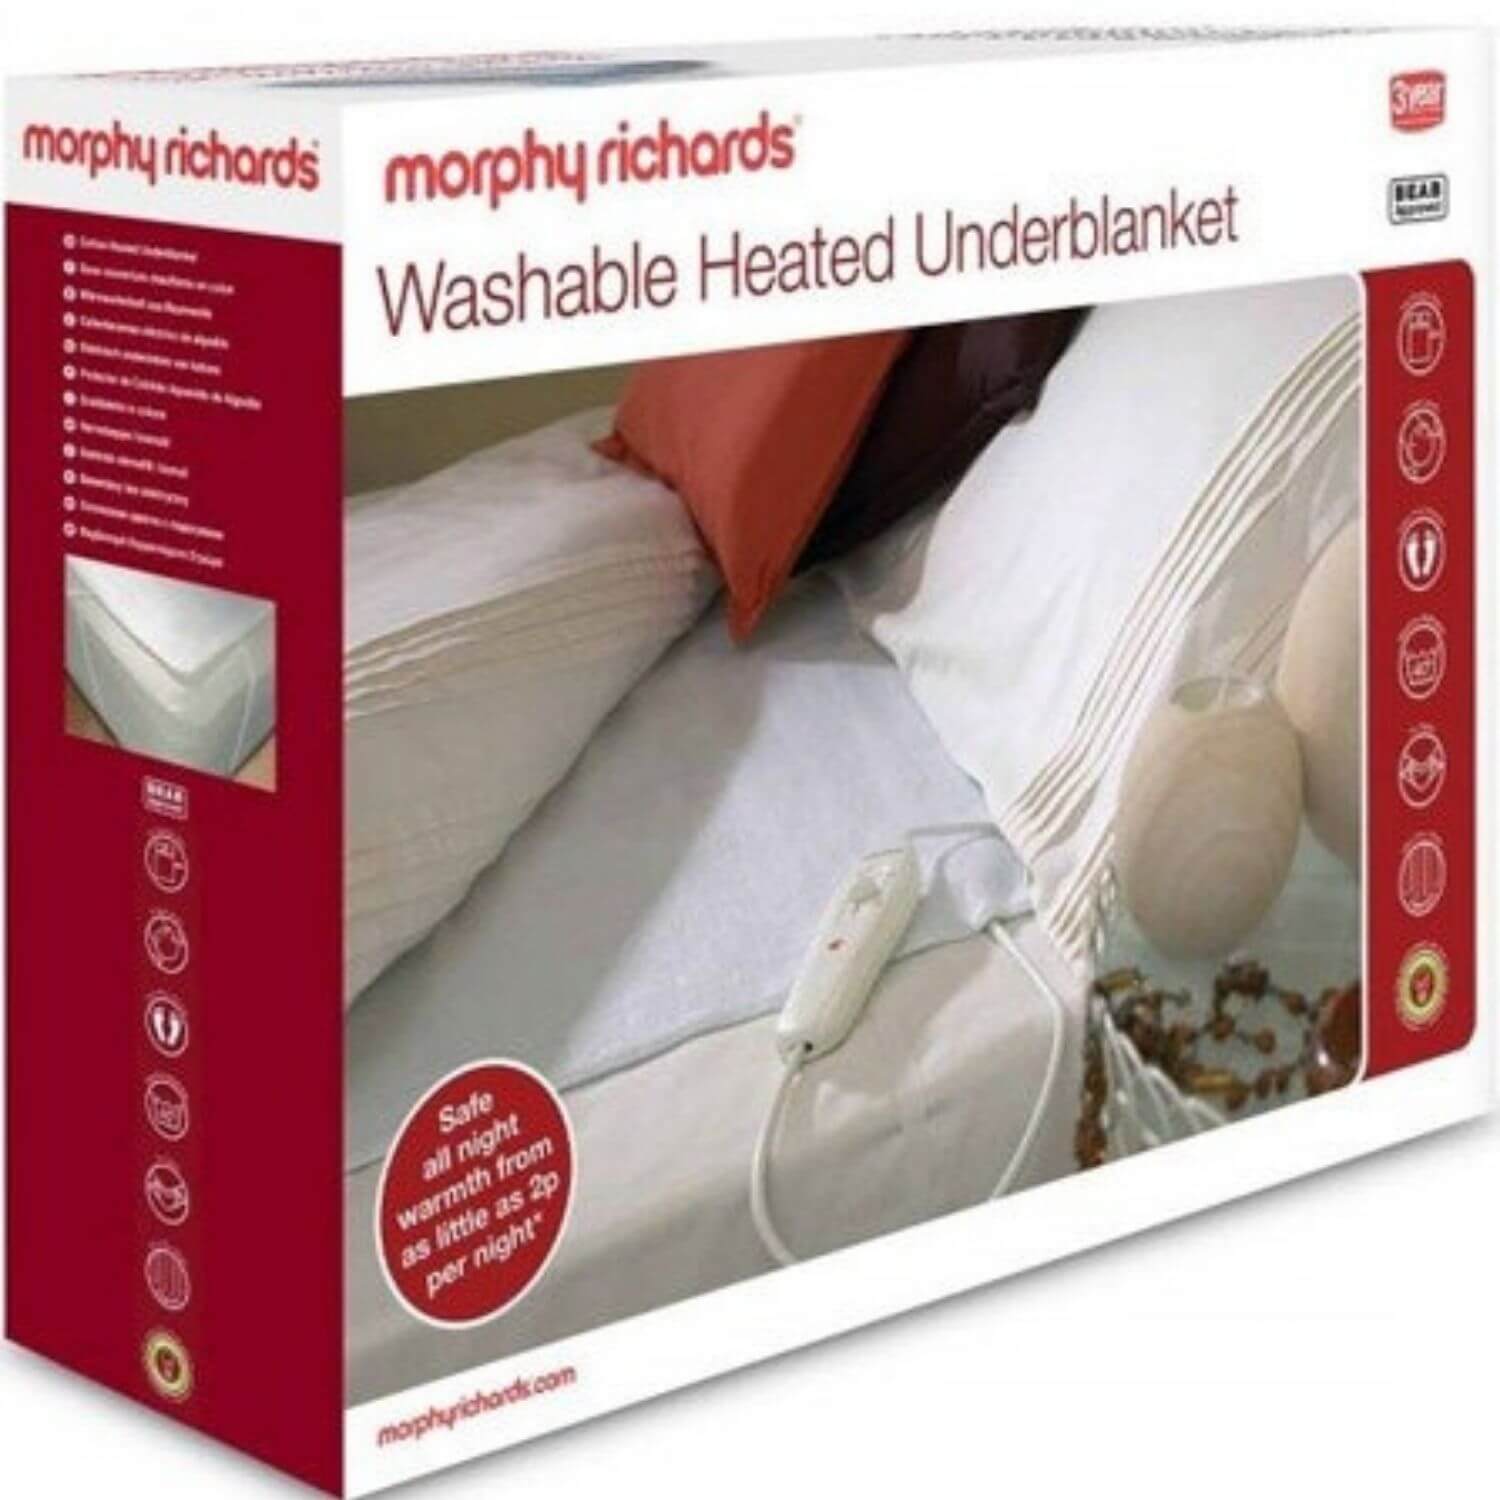 Morphy Richards Washable Heated Underblanket - Double Size | 600114 1 Shaws Department Stores